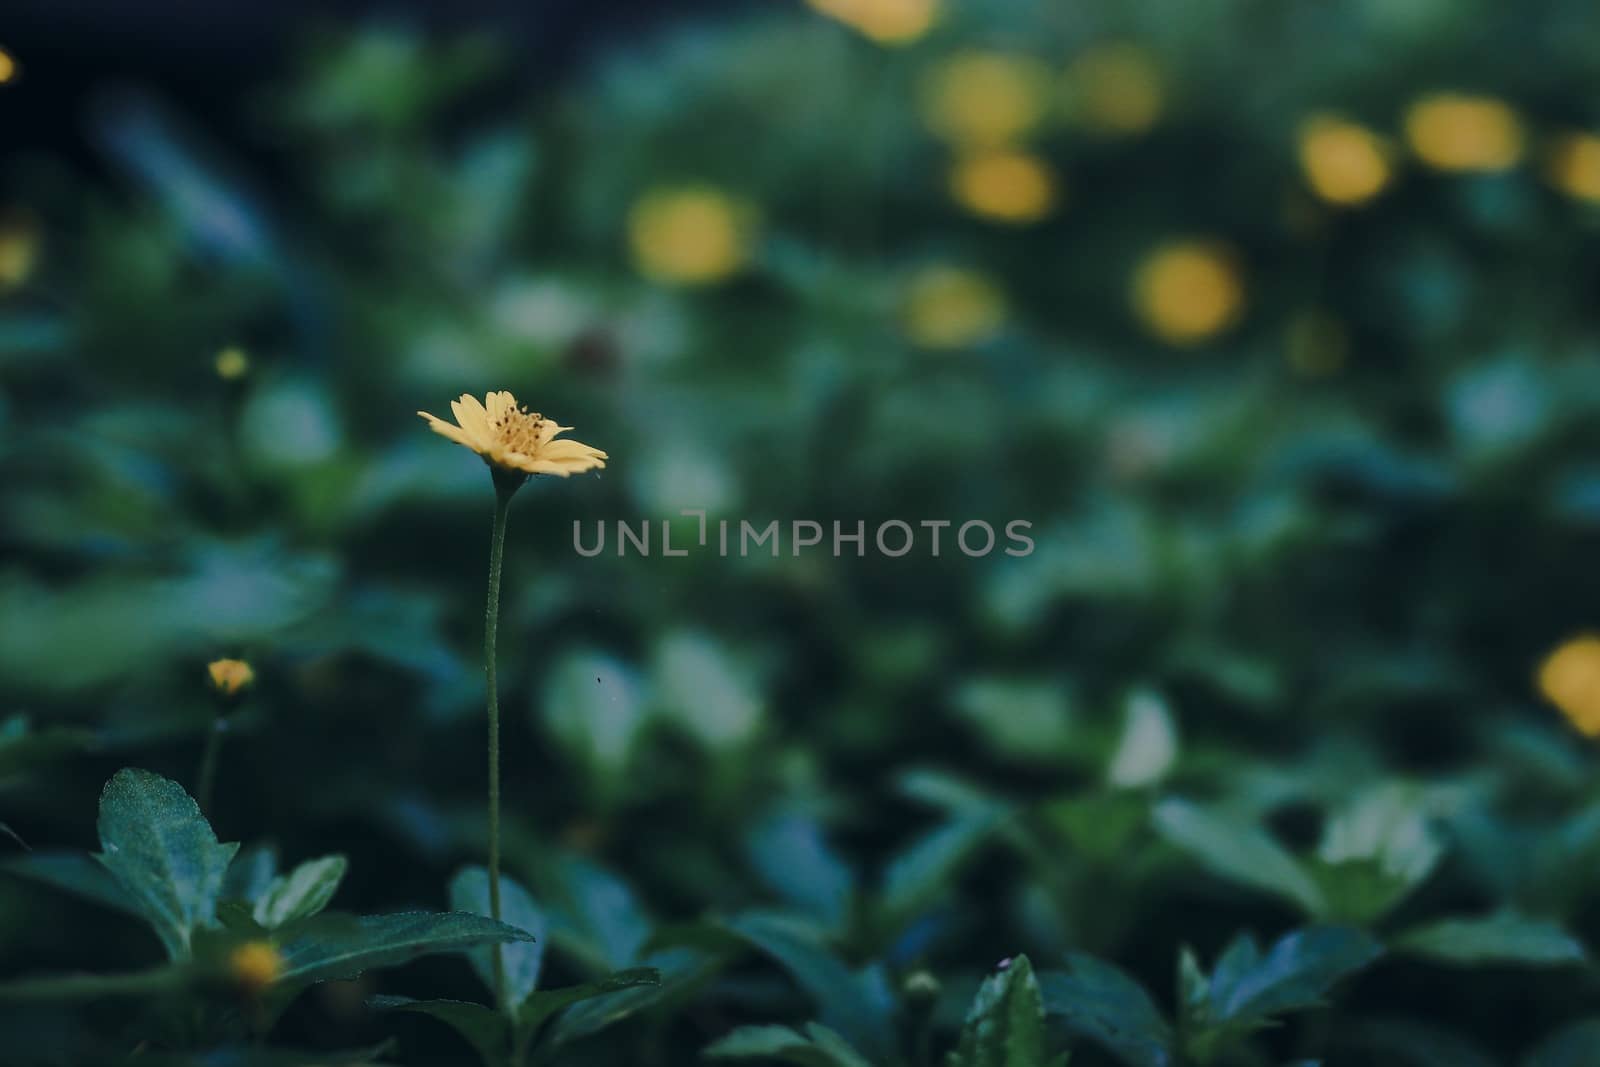 Wild flowers in nature, blurry scene by aekgasit